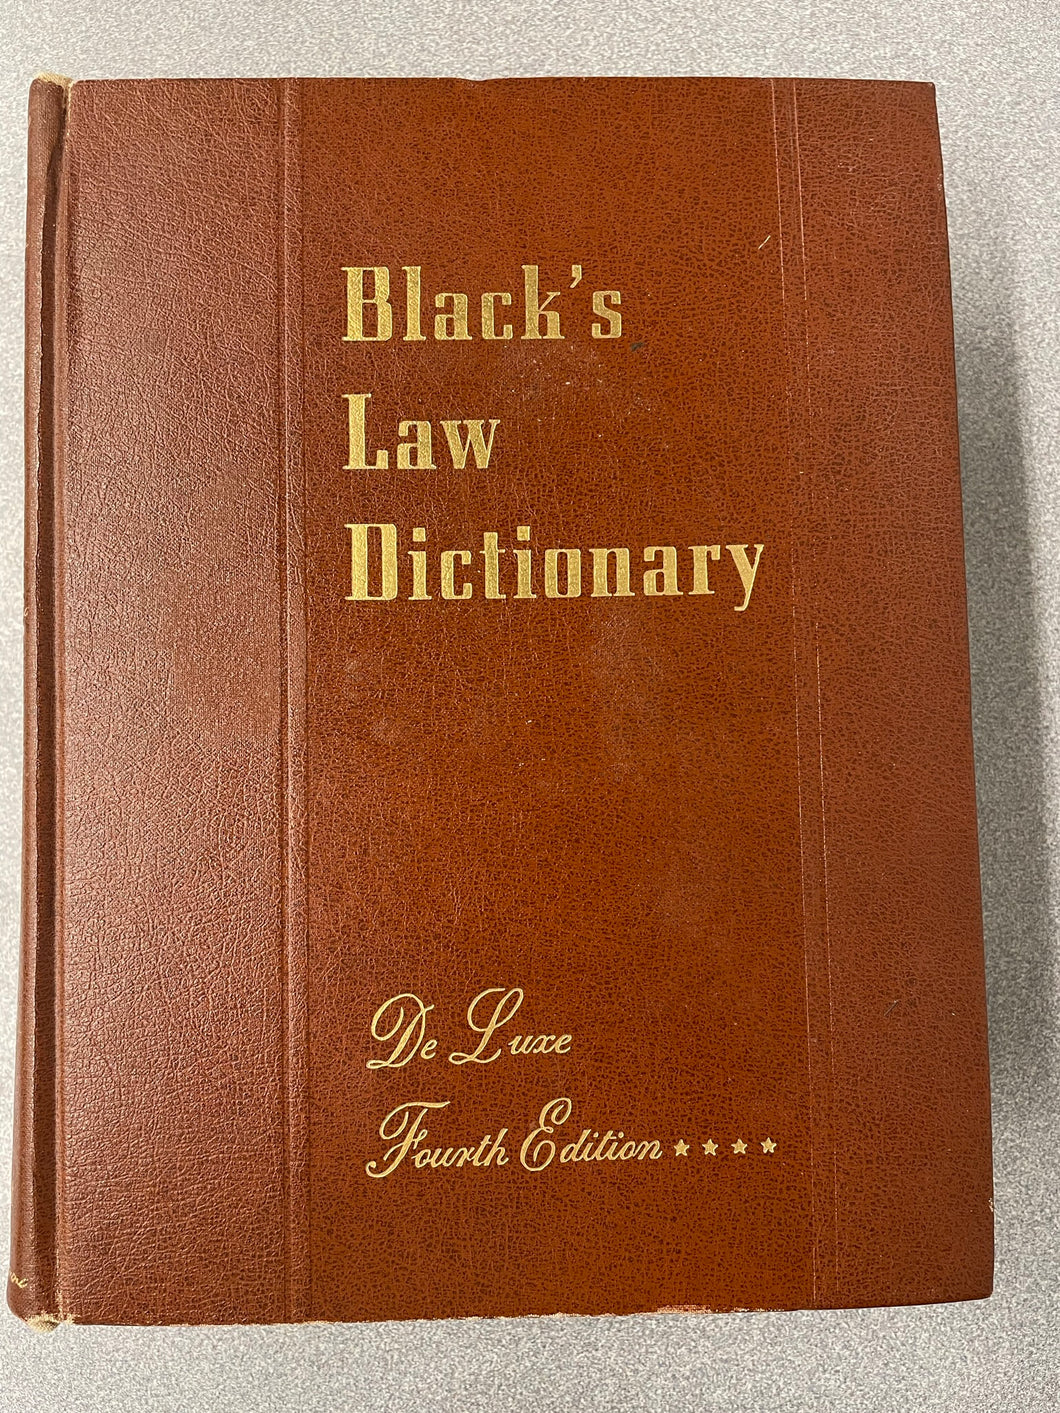 Black's Law Dictionary [1957] REF 8/23